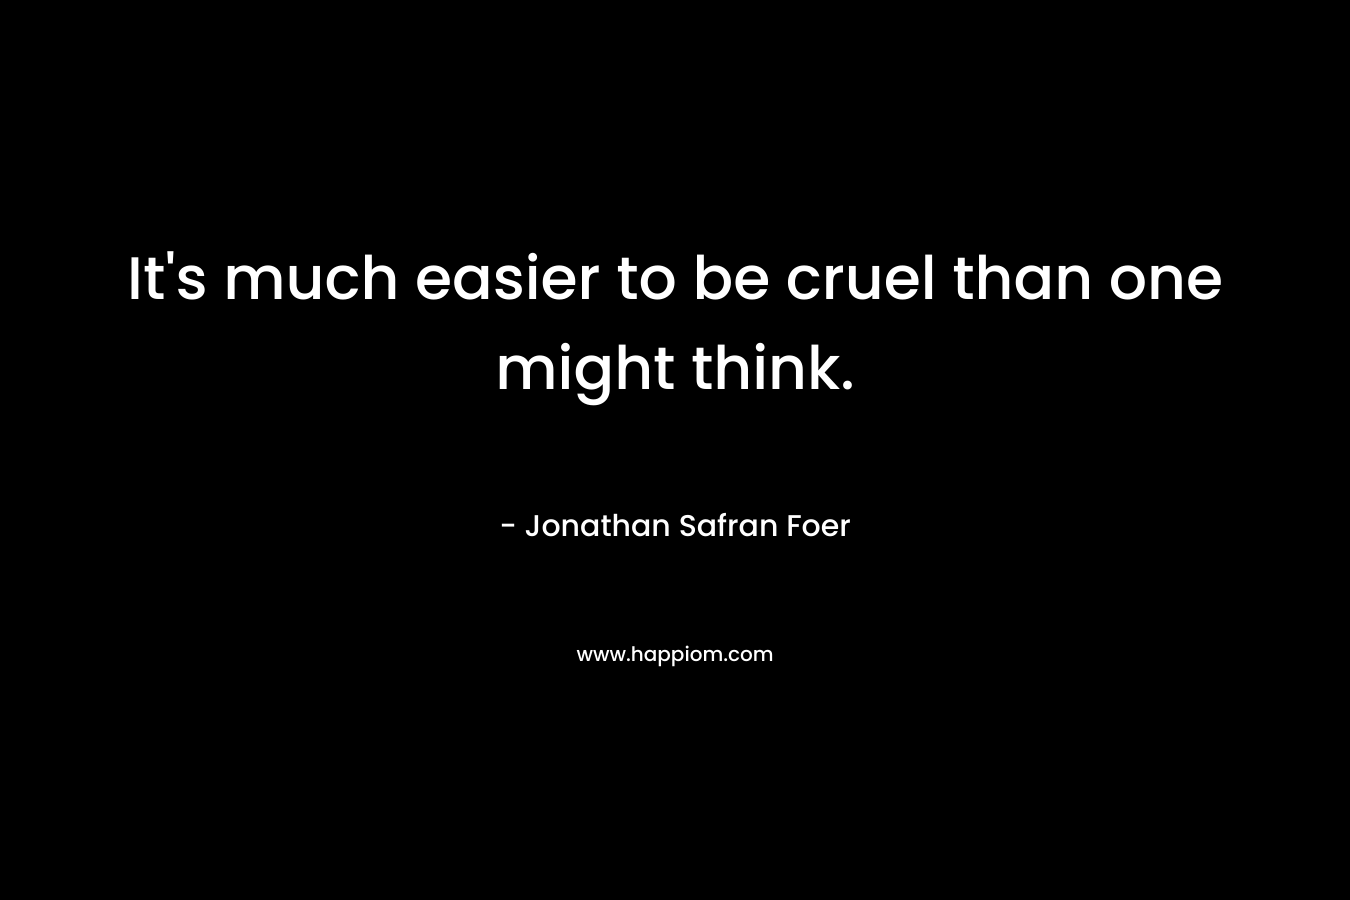 It's much easier to be cruel than one might think.